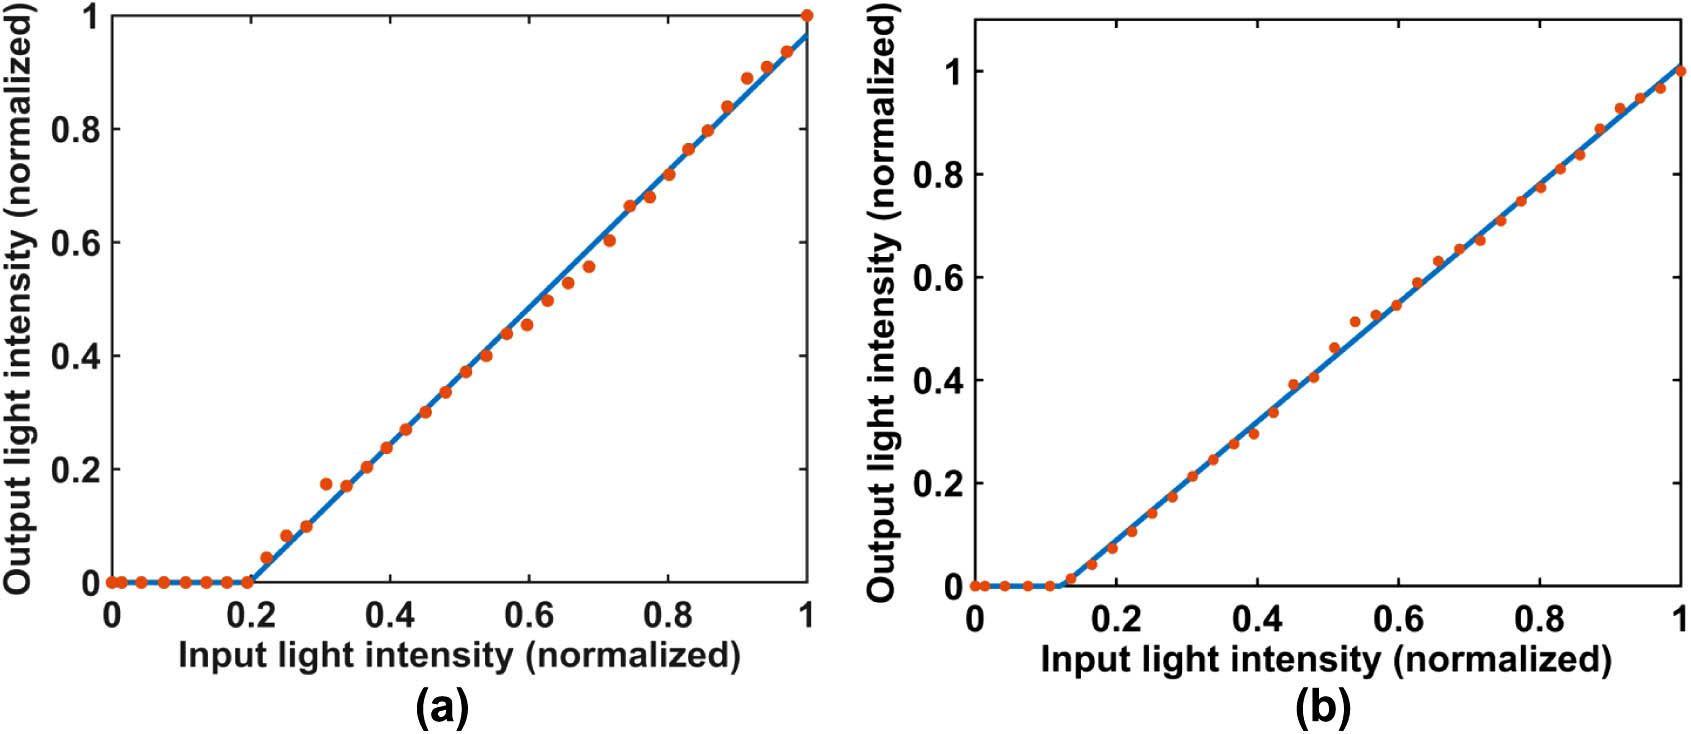 Fitting nonlinear curves of quantum dots with different component molar ratios. (a) 1:9:2. (b) 1:9:0.5.